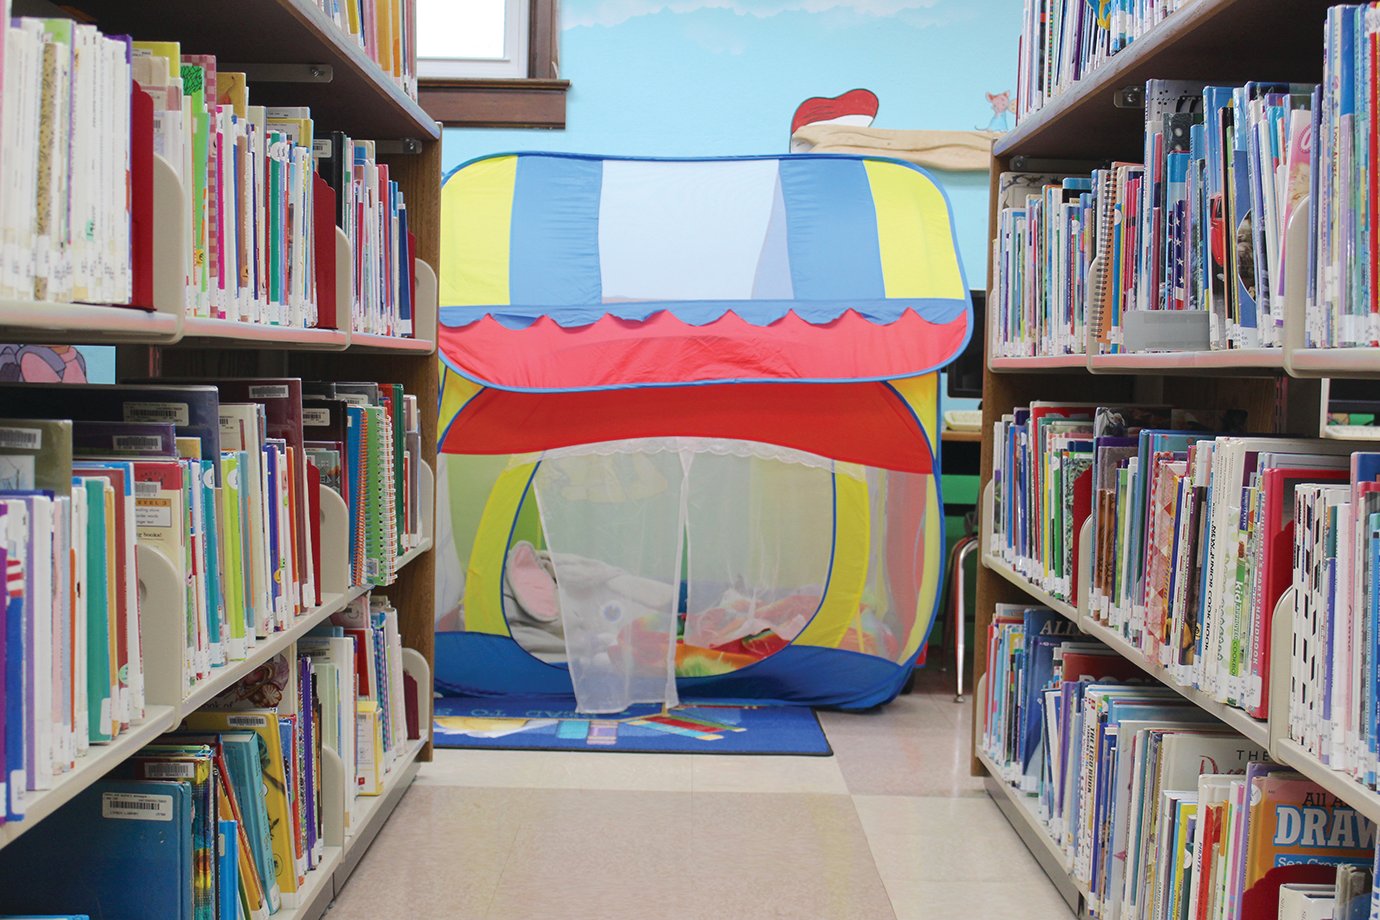 A play tent in the children's area.